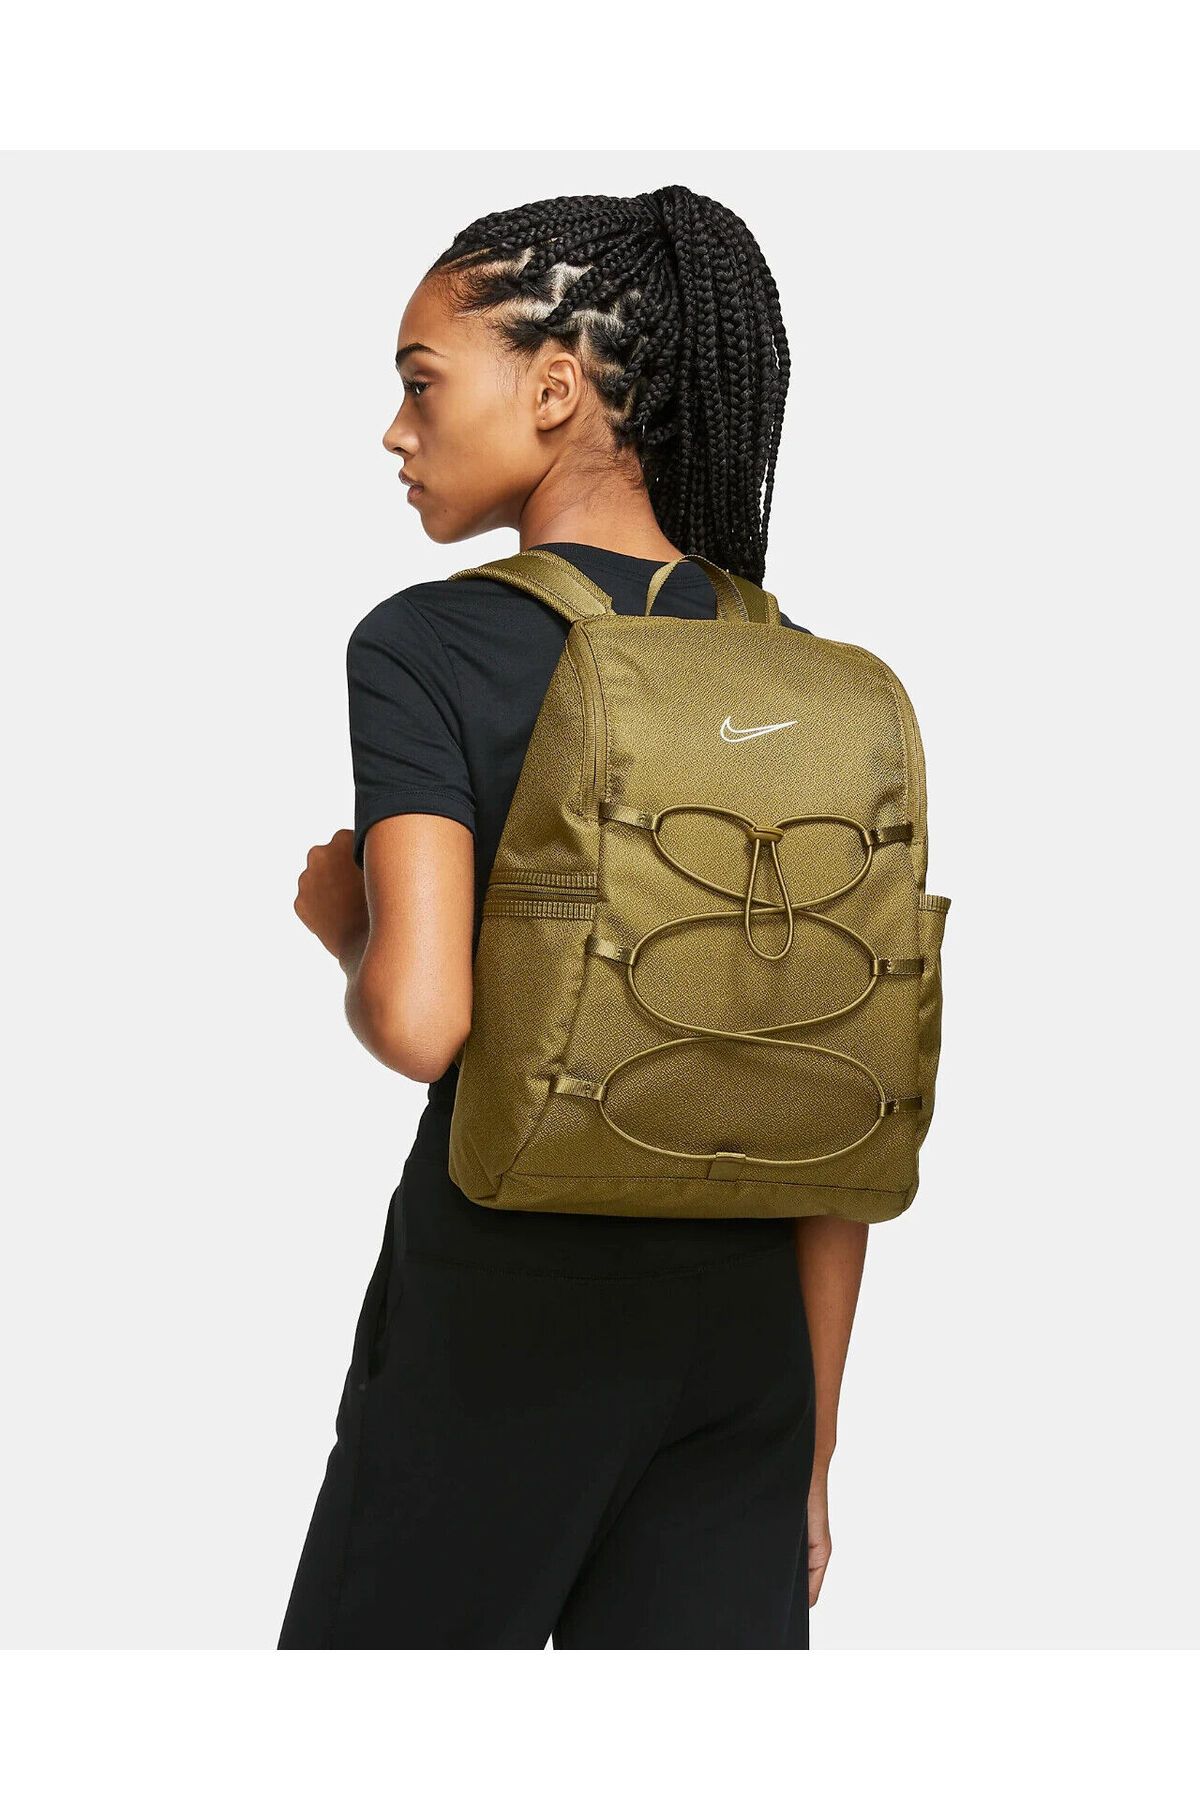 Nike One Women's Workout Backpack Sport Gym